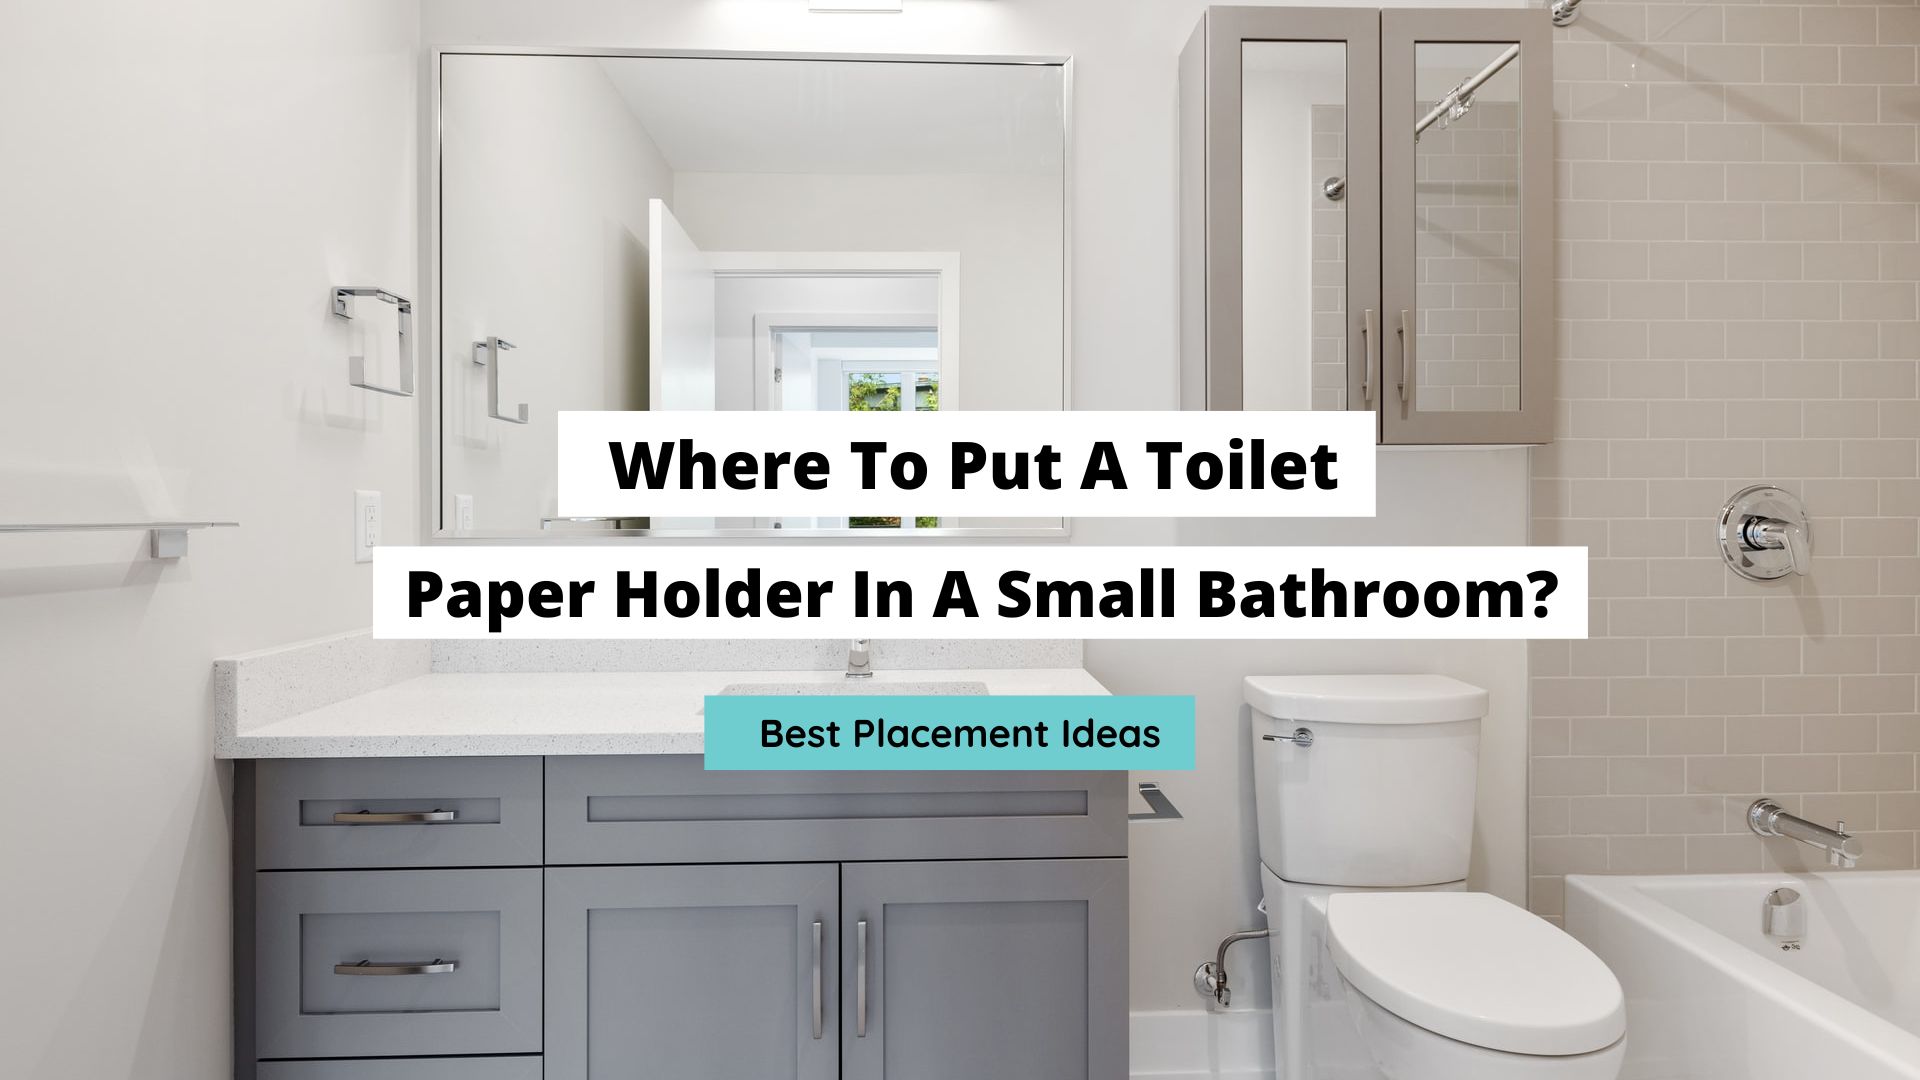 https://craftsonfire.com/wp-content/uploads/2022/08/where-to-put-a-toilet-paper-holder-in-a-small-bathroom.jpg